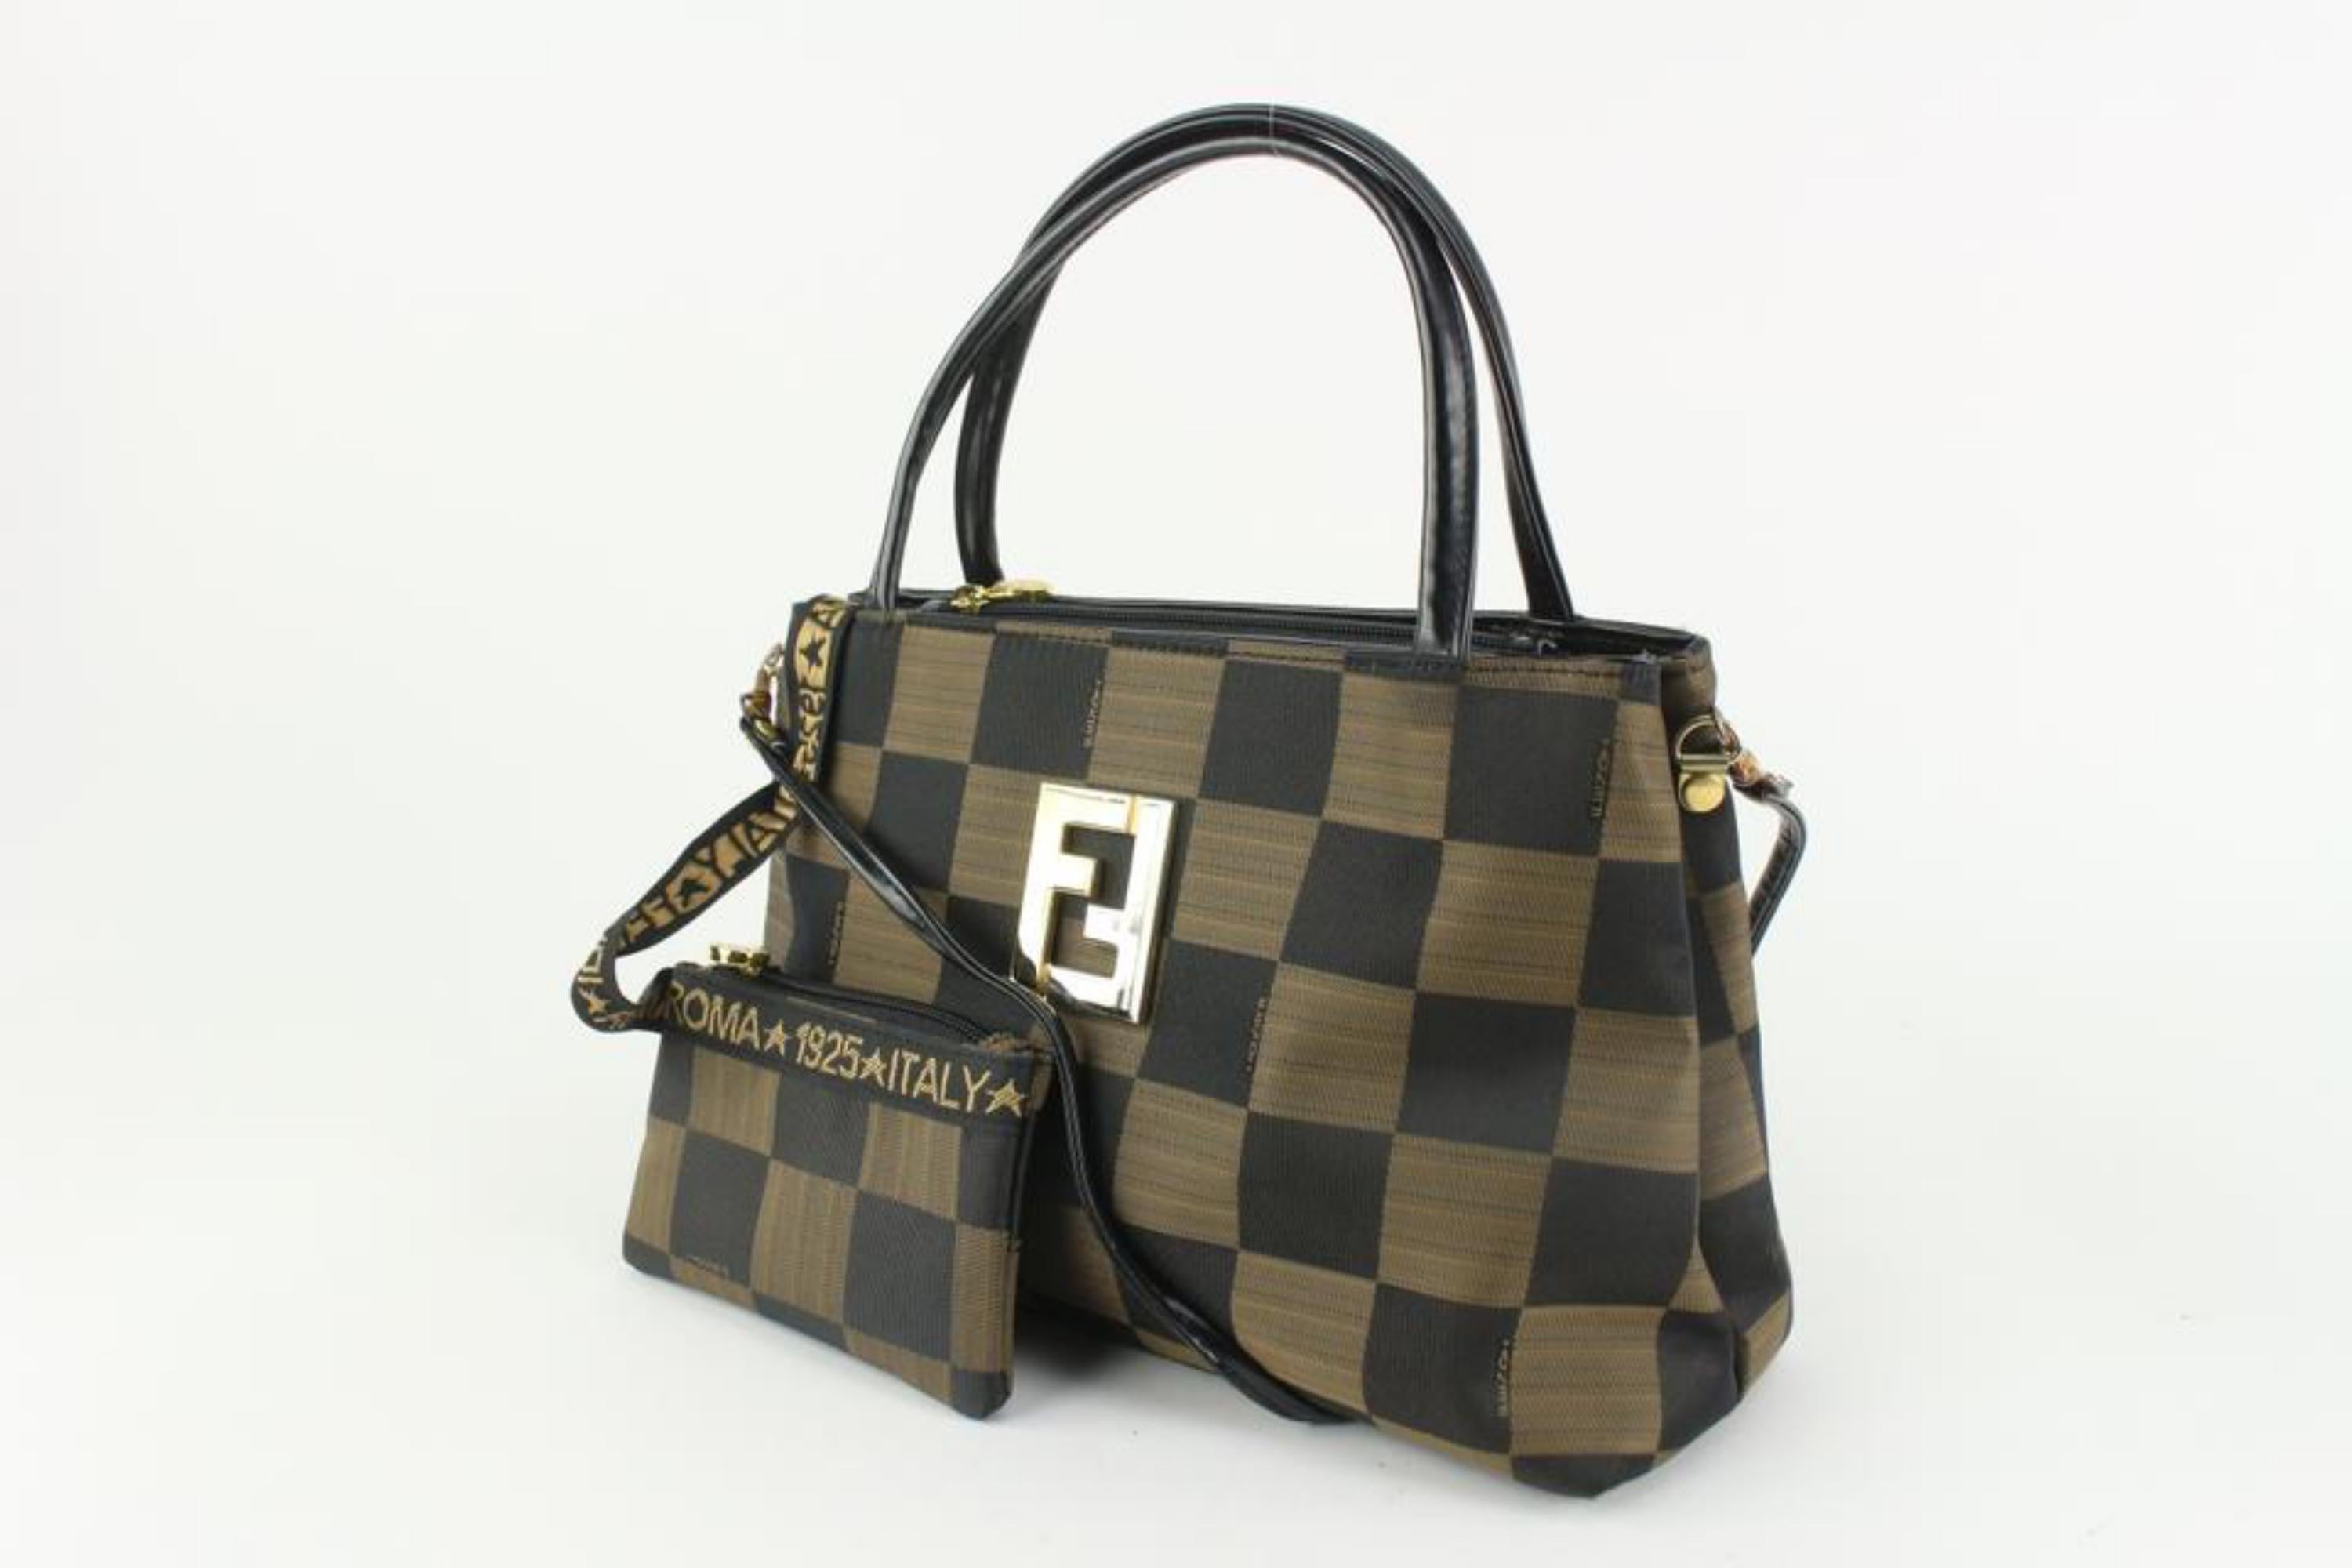 Fendi Rare Vintage Brown Checker Box 2way Tote with Pouch 1220f41
Made In: Italy
Measurements: Length:  12